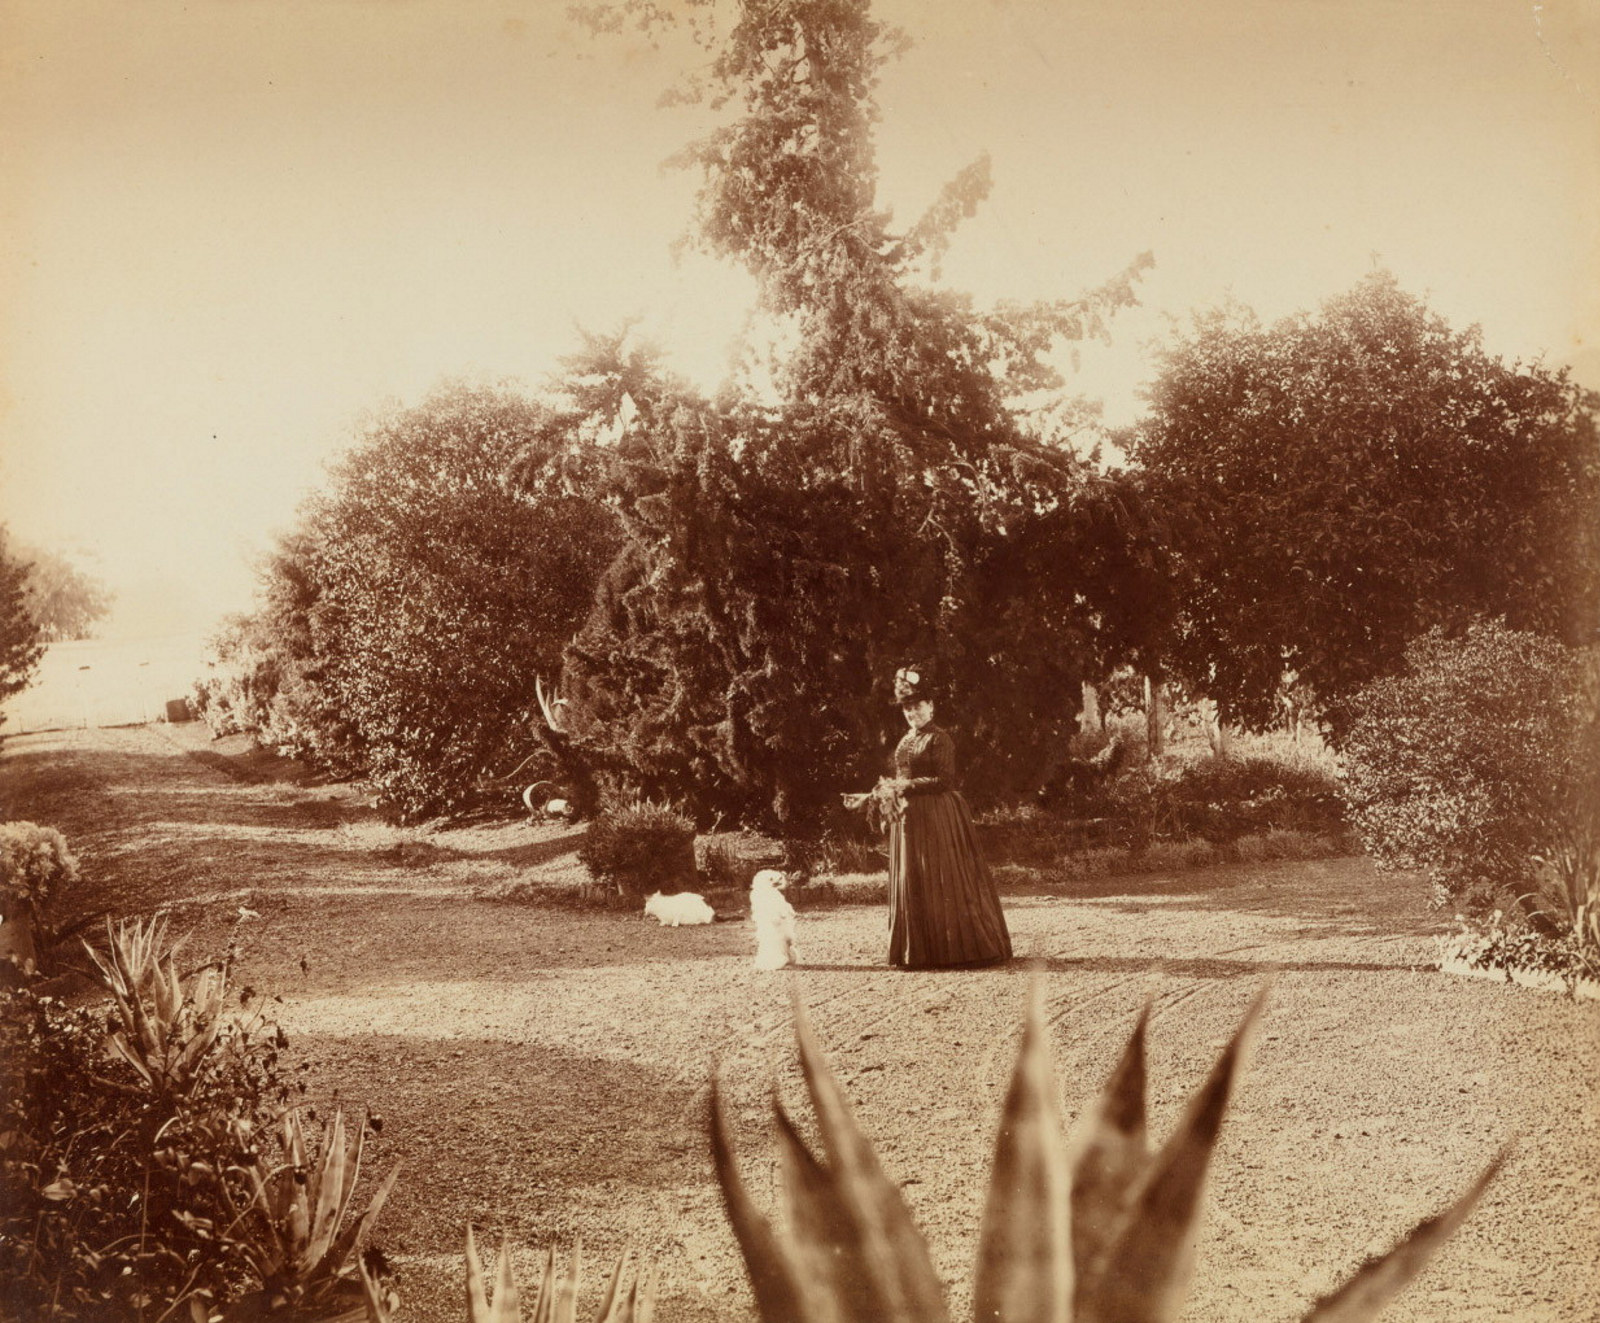 First panel in a five part photographic panorama of Turanville near Scone / photograpjed by Joseph Check, 1889